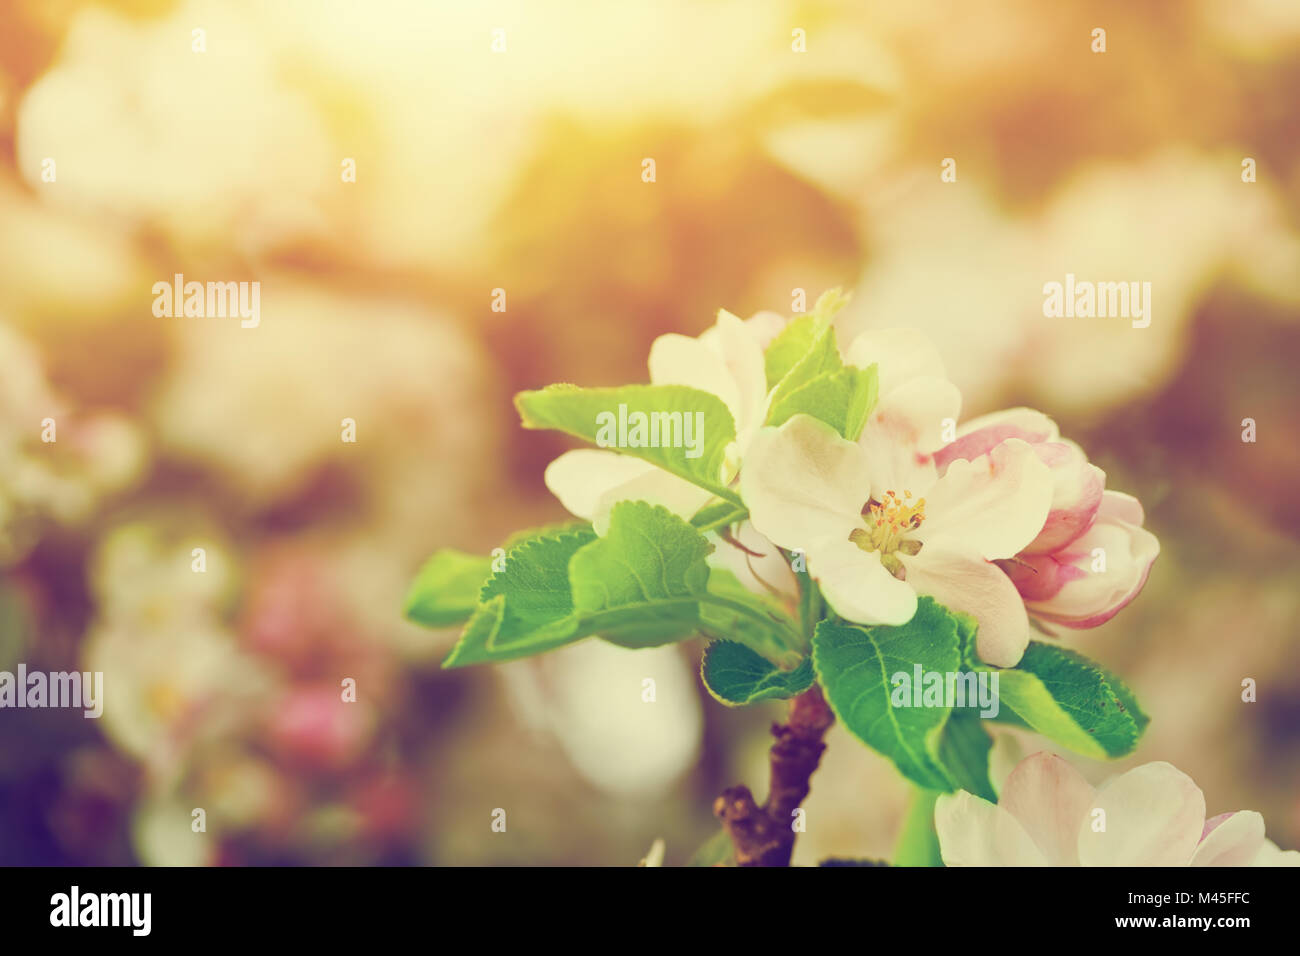 Spring tree flowers blossom, bloom in warm sun. Vintage Stock Photo